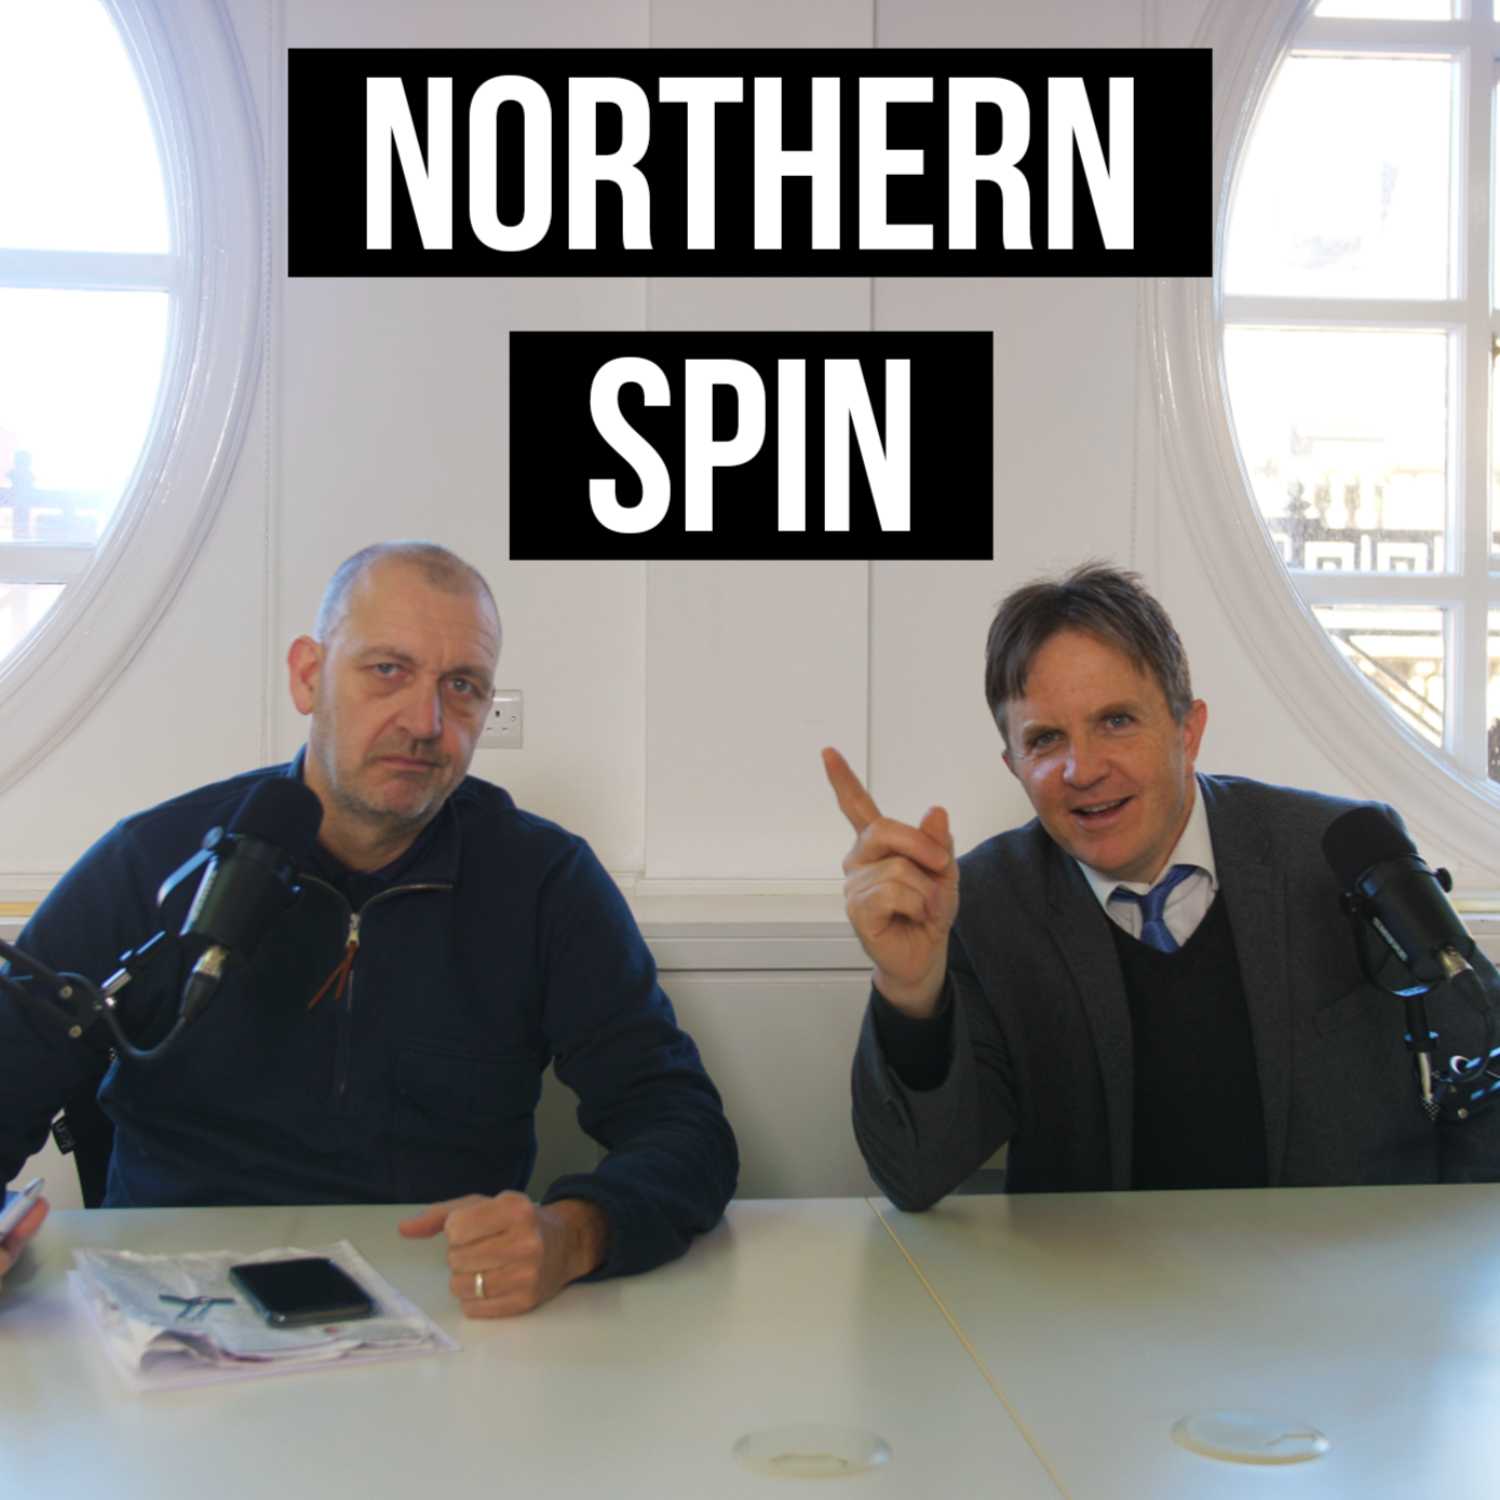 Northern Spin - Season 4 - Episode 8: A RADICAL PLAN TO DO BREXIT PROPERLY